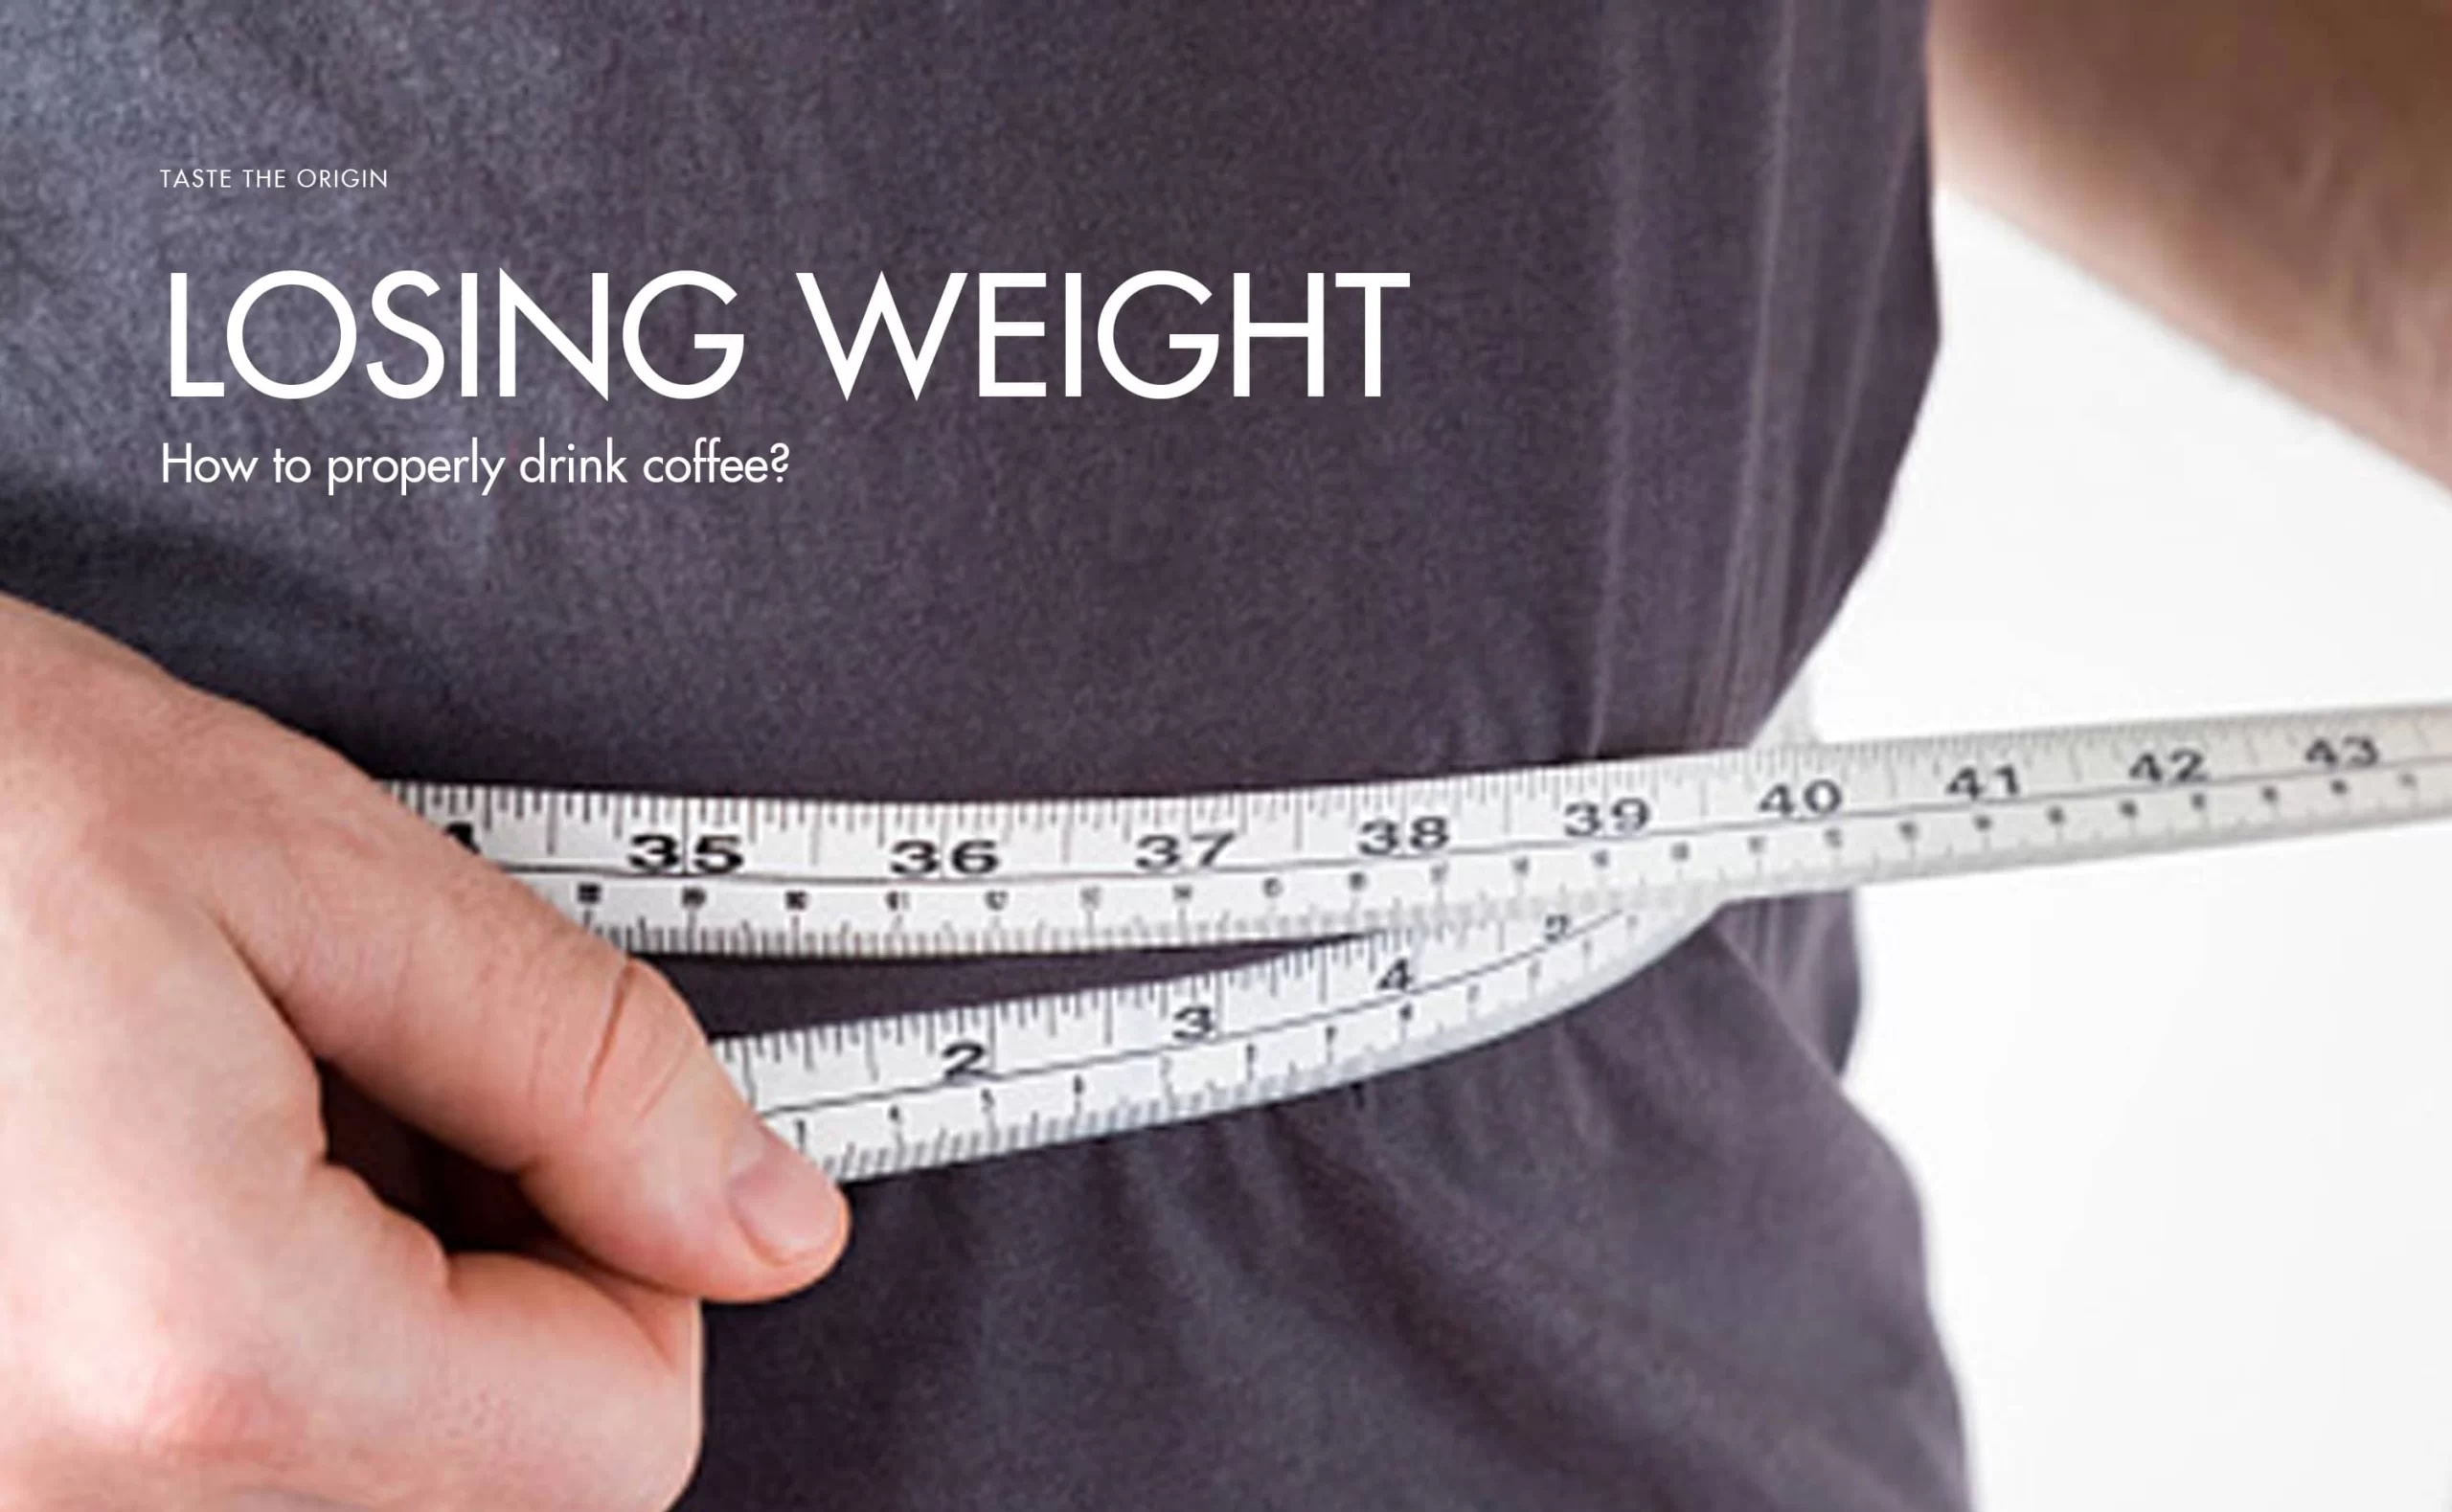 How to drink coffee to lose weight properly and effectively?